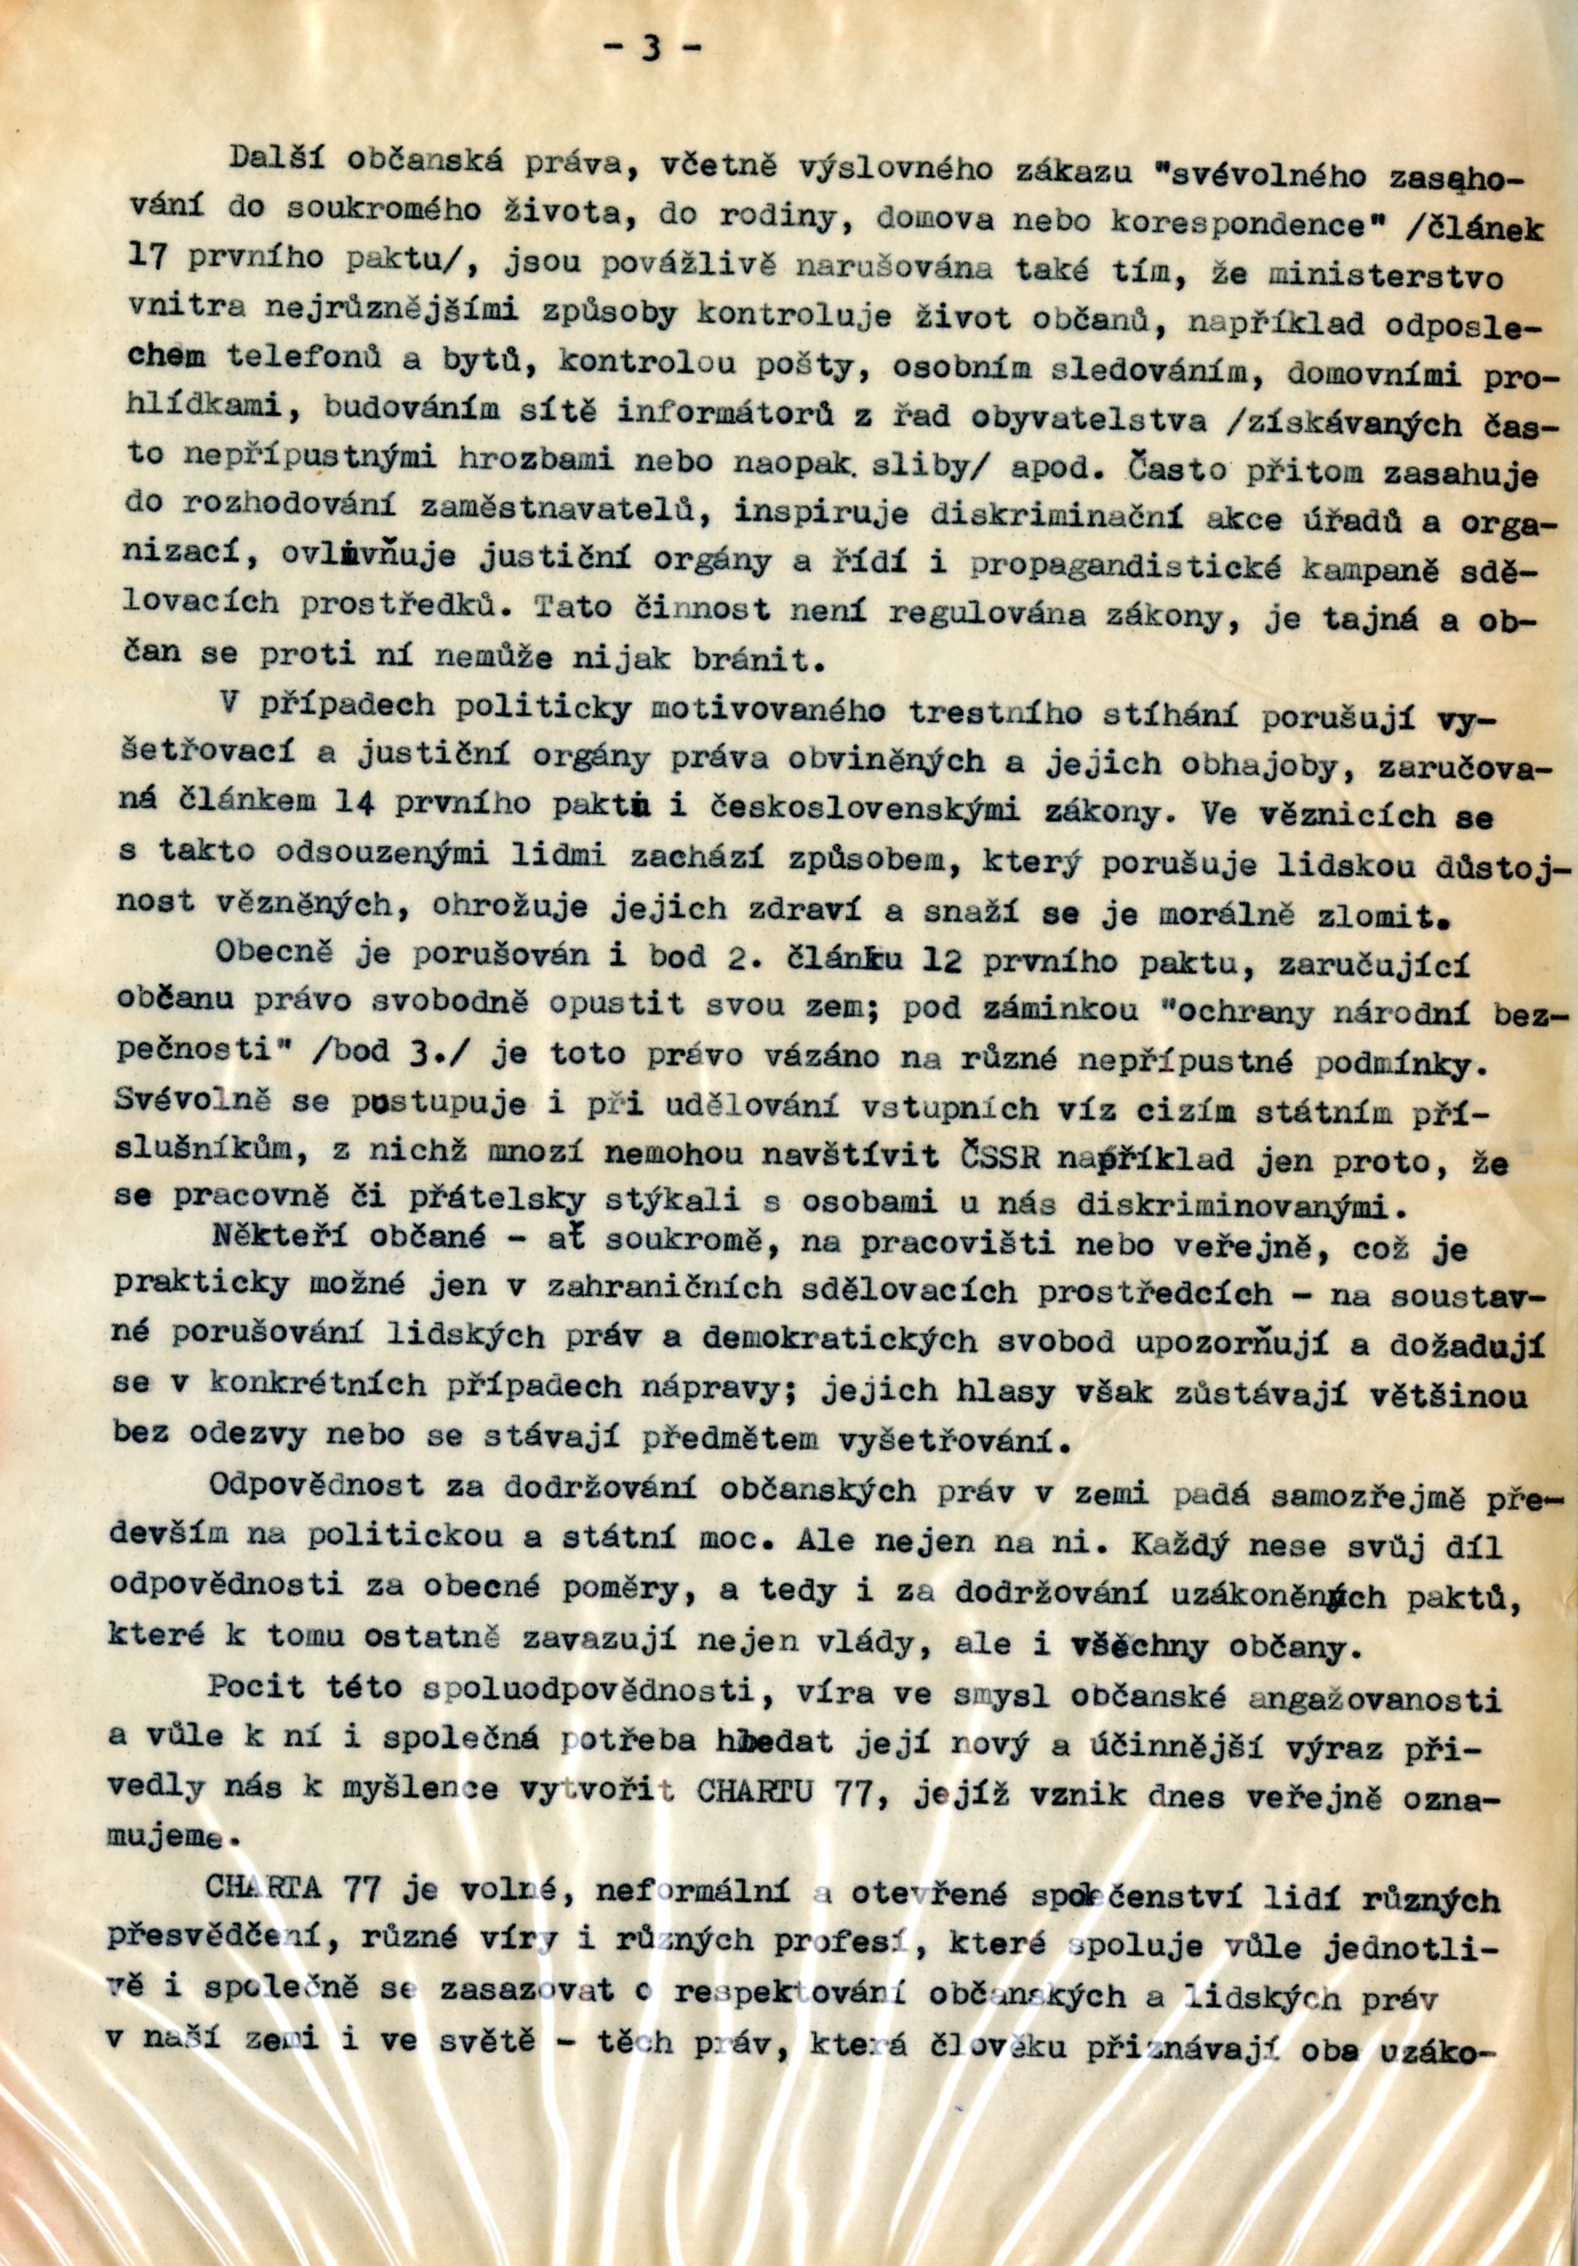 Third page of Charter 77